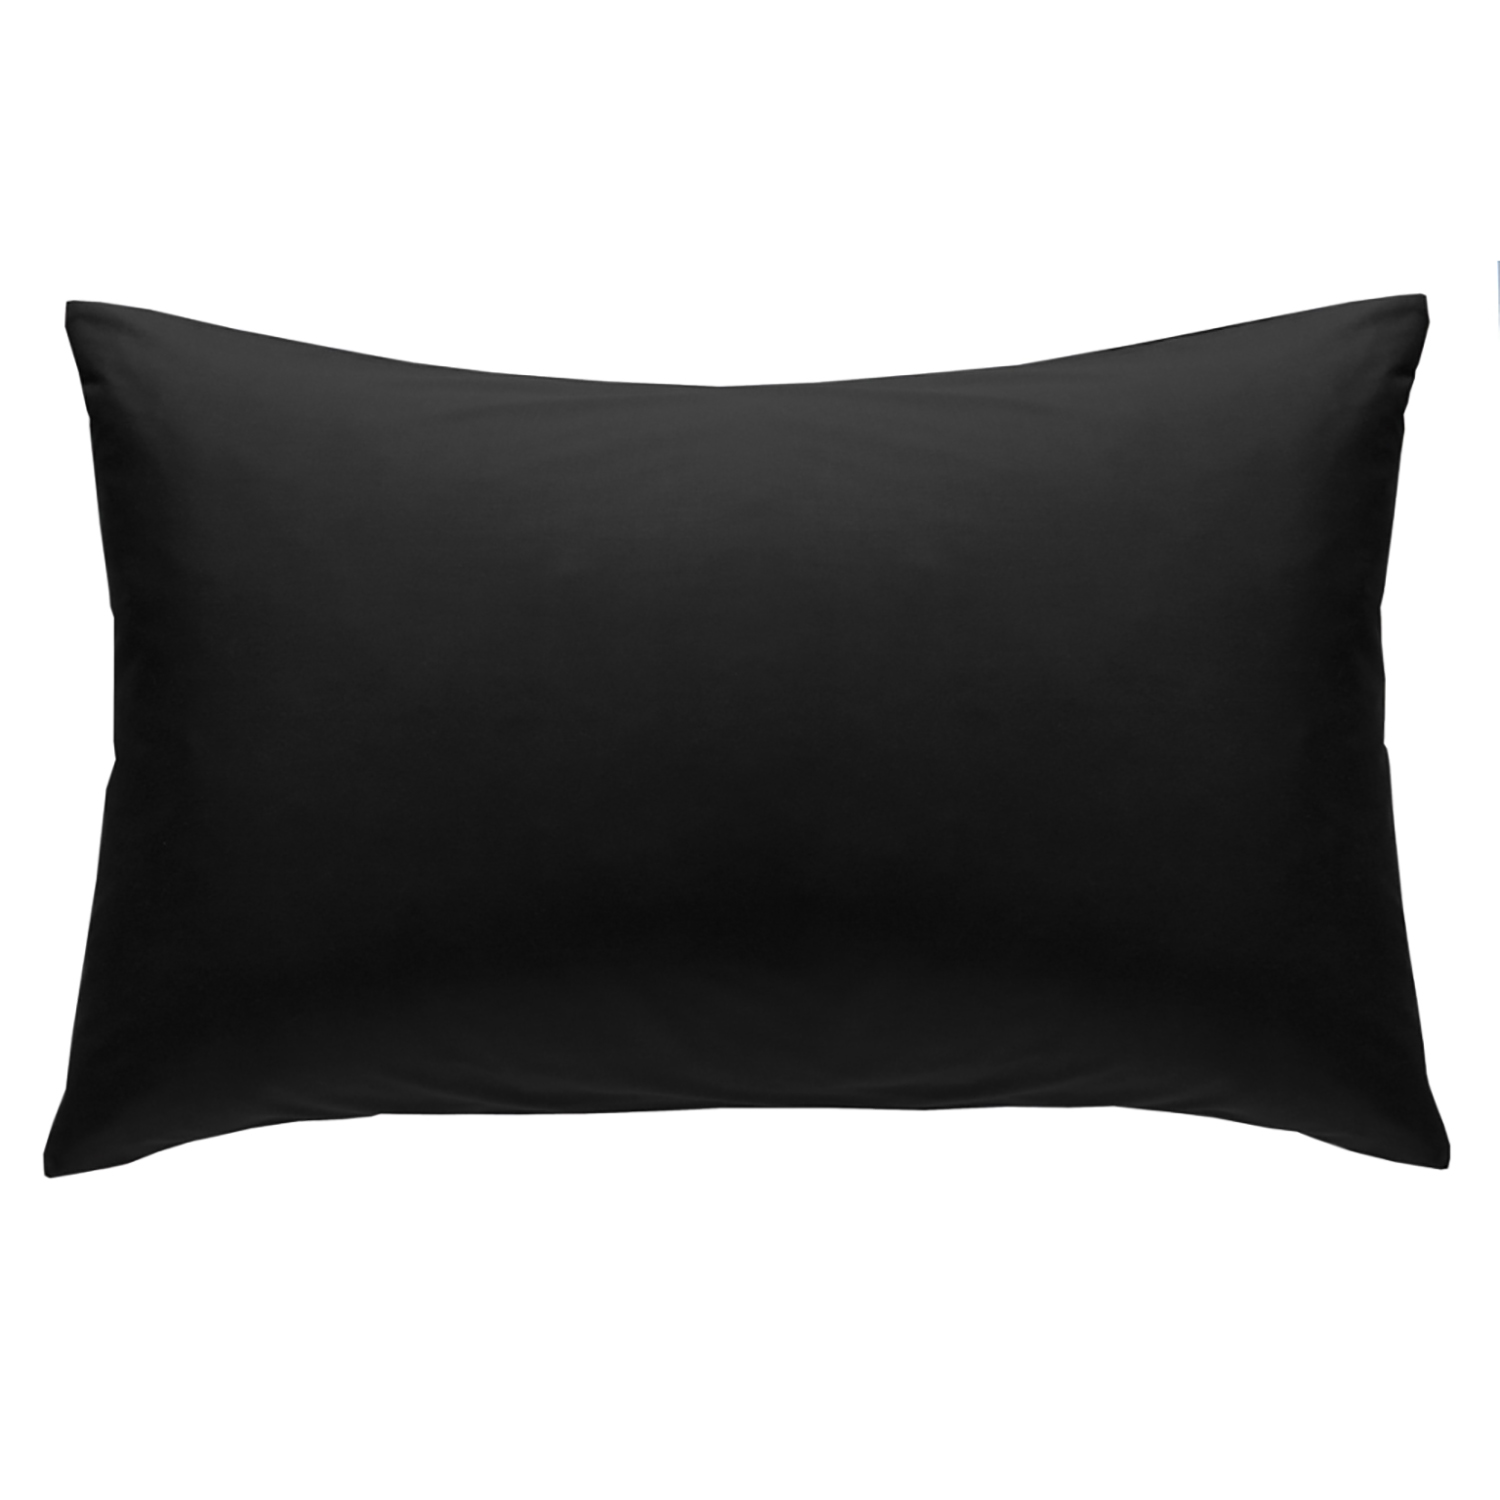 Luxury Percale Housewife Pillowcase Pair - Black - Home Store + More